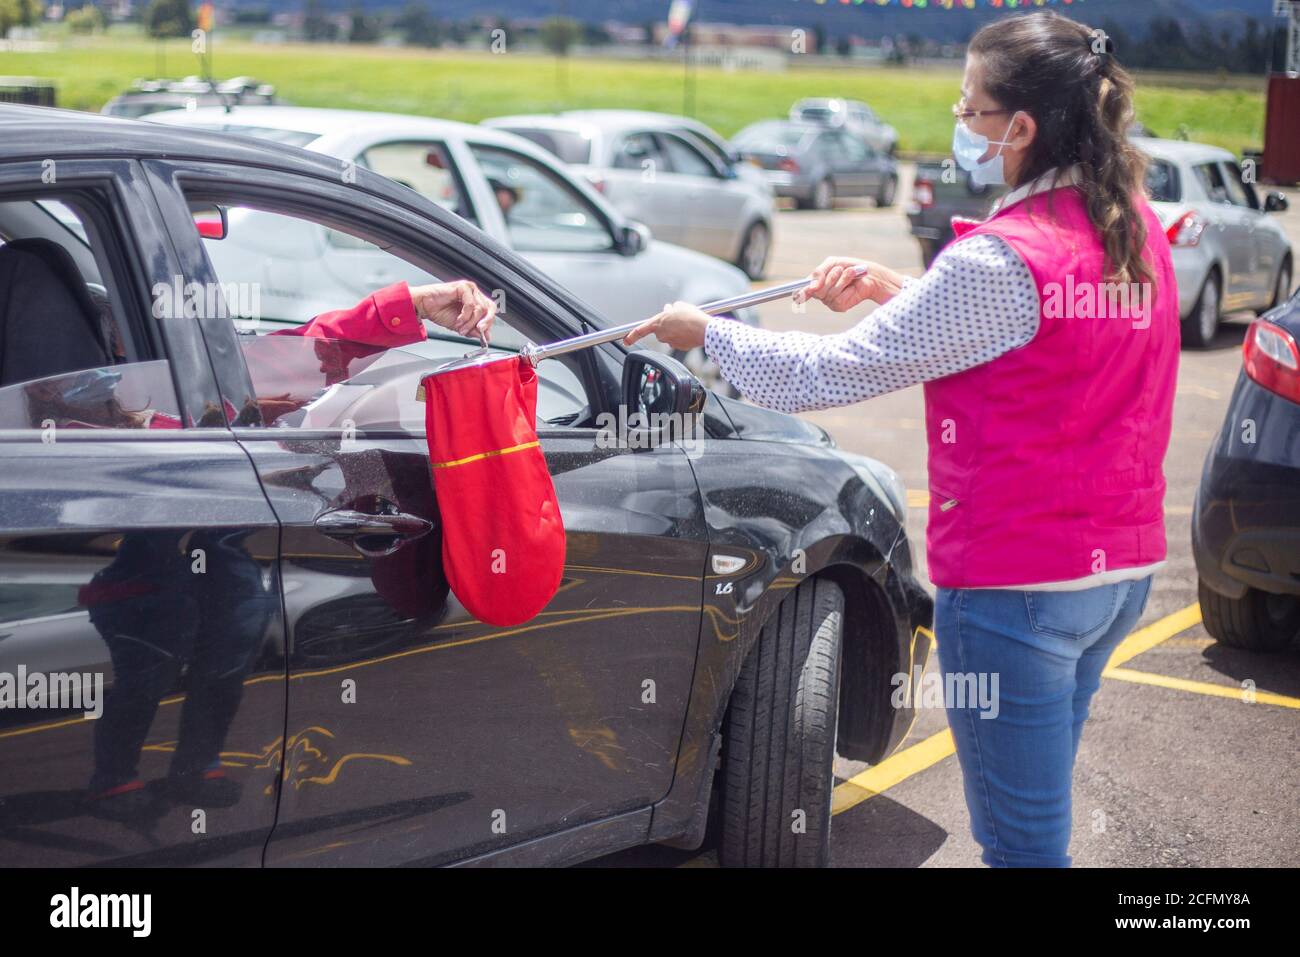 Bogota, Colombia. 6th Sep, 2020. One person passes by each car receiving donations in the car at the Los Andes racecourse in the city of BogotÃ¡.Due to the pandemic, the churches have not been able to reopen for people to go. In the coming weeks, the Colombian government will authorize the pilots for the opening. Credit: Daniel Garzon Herazo/ZUMA Wire/Alamy Live News Stock Photo